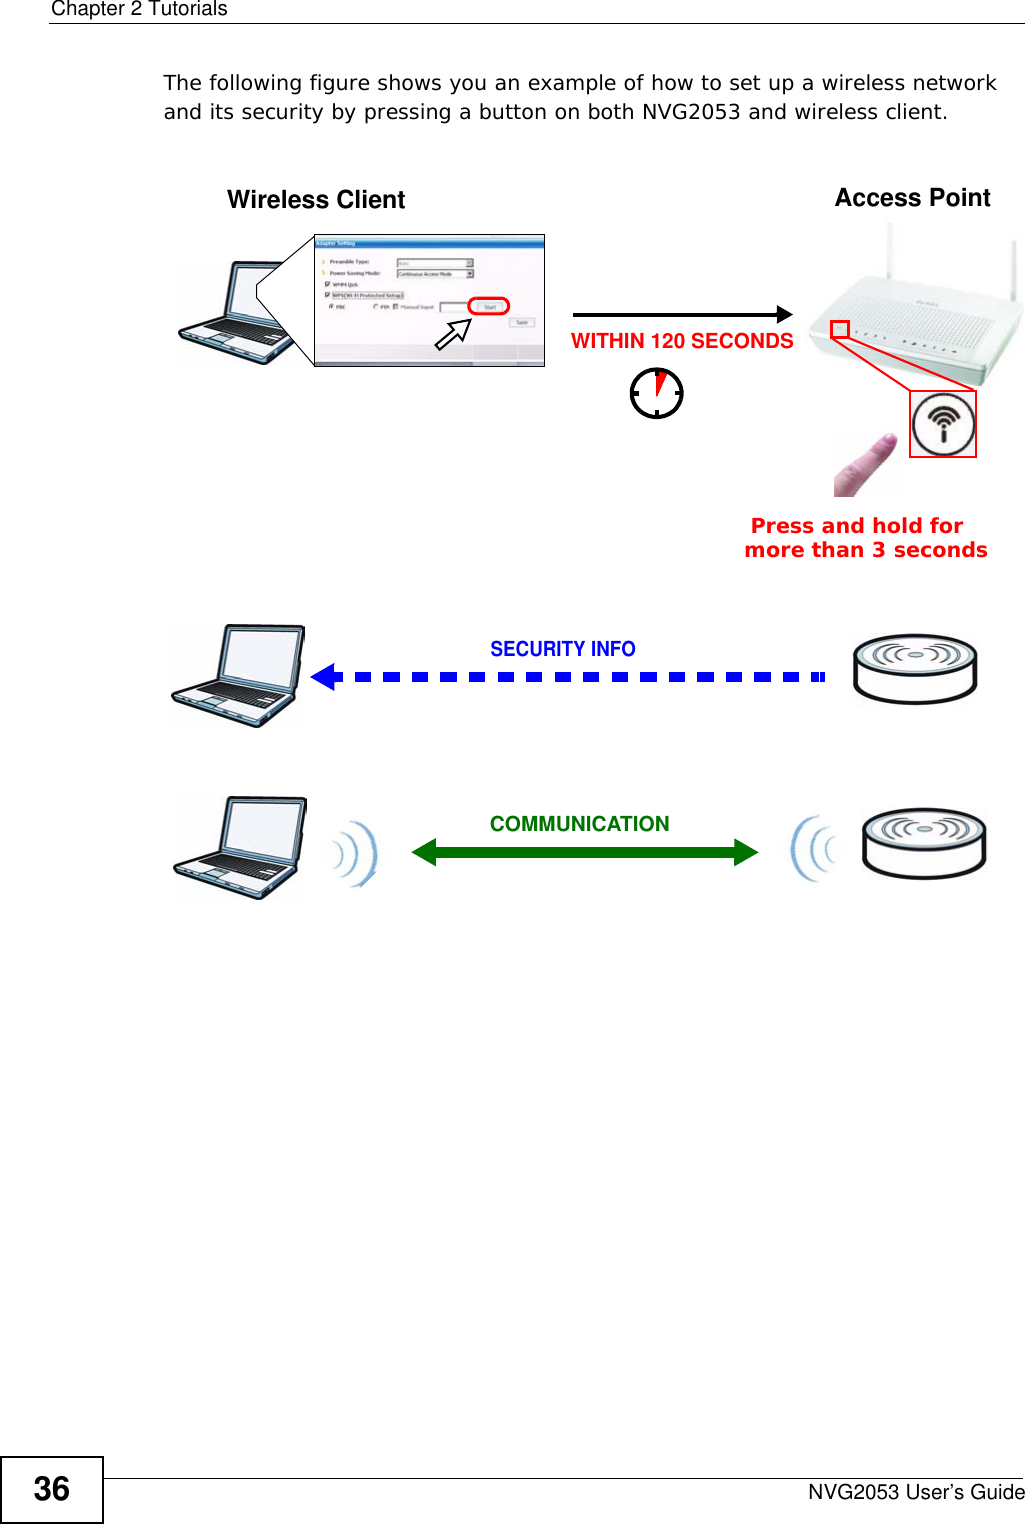 Chapter 2 TutorialsNVG2053 User’s Guide36The following figure shows you an example of how to set up a wireless network and its security by pressing a button on both NVG2053 and wireless client.Example WPS Process: PBC MethodWireless Client Access PointSECURITY INFOCOMMUNICATIONWITHIN 120 SECONDSPress and hold for   more than 3 seconds